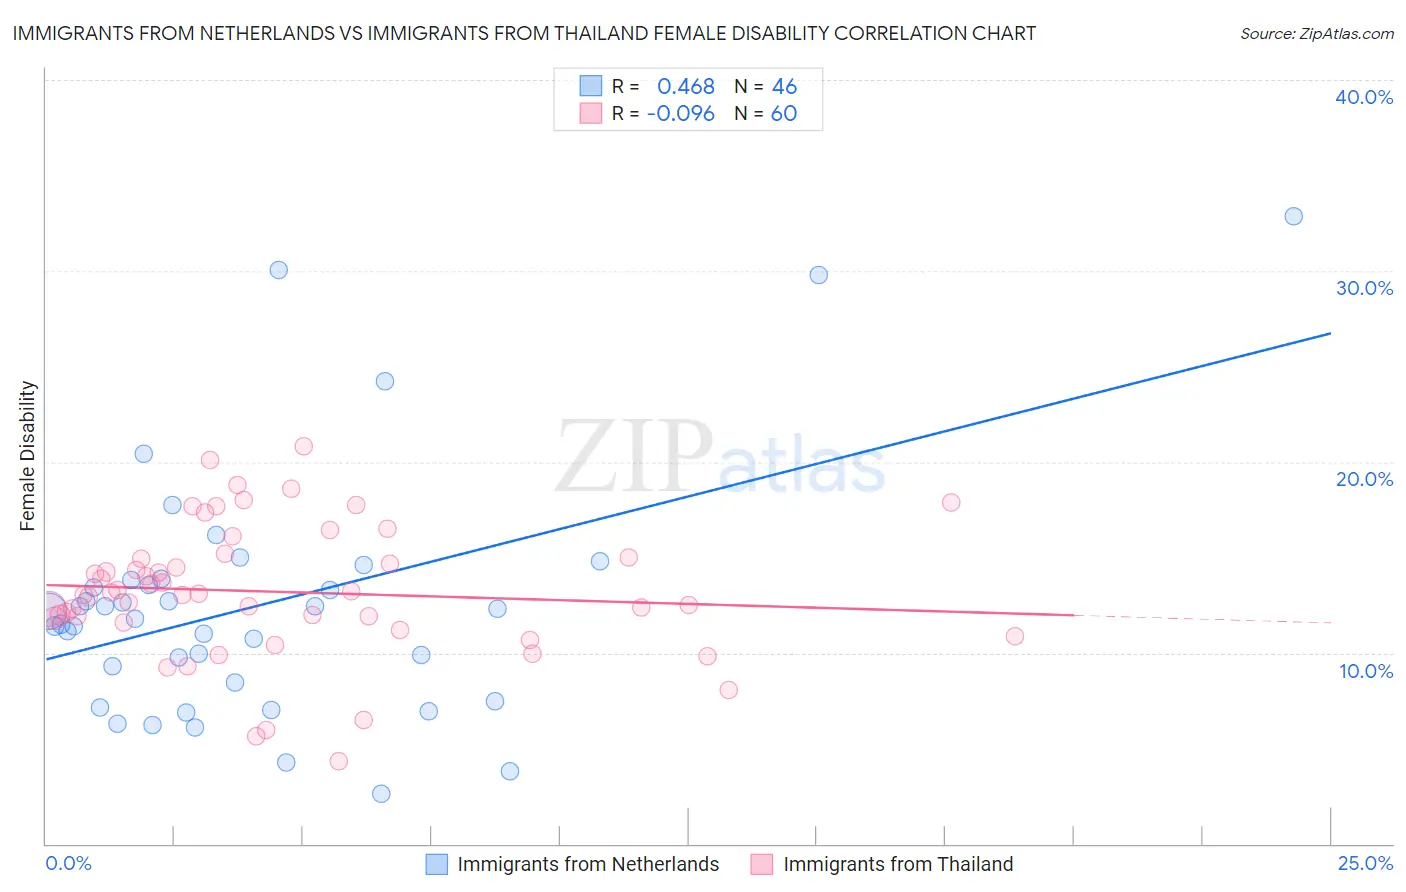 Immigrants from Netherlands vs Immigrants from Thailand Female Disability